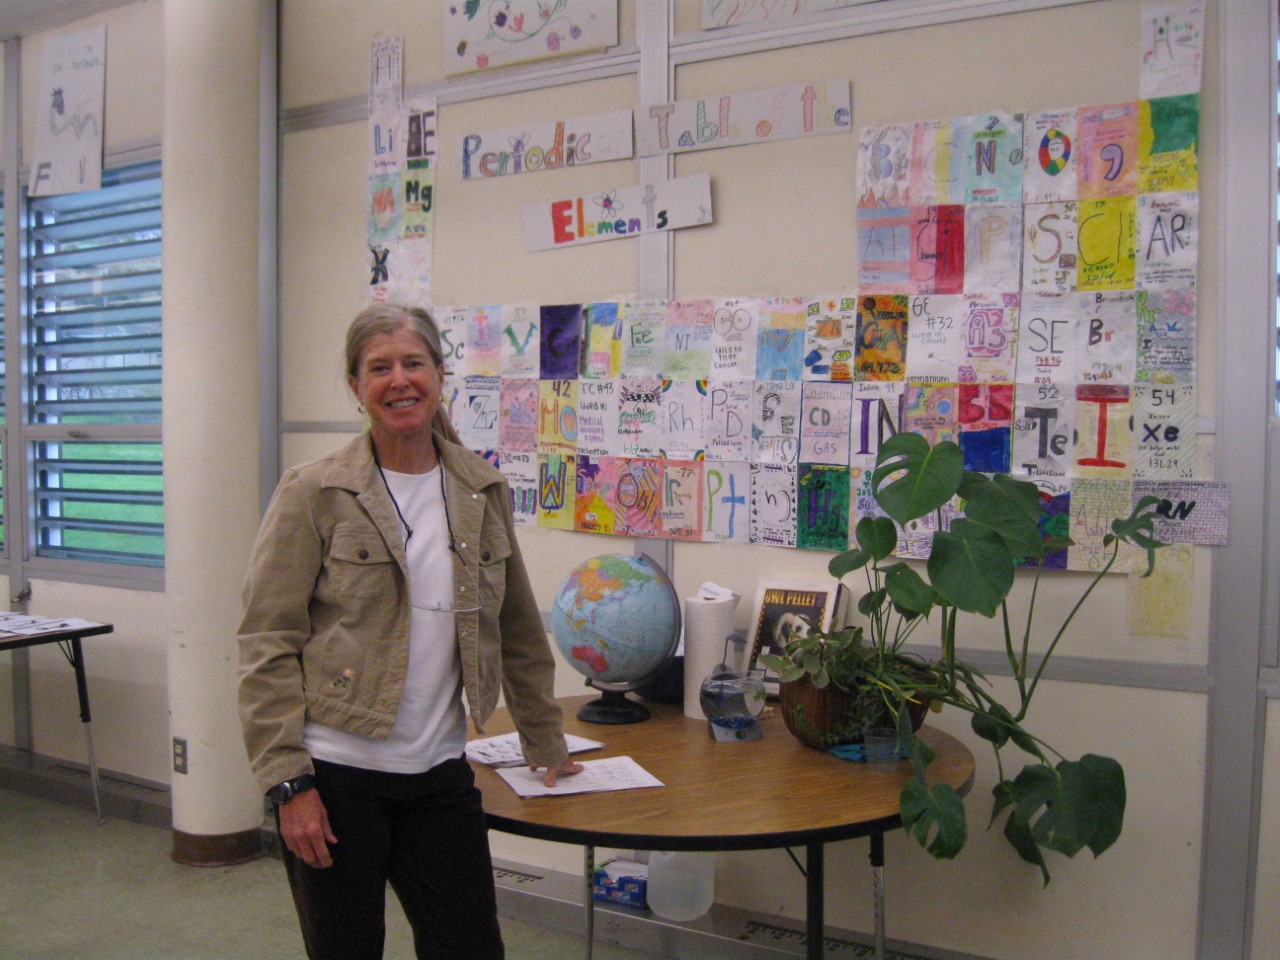 Reflections and Future Plans from a Retiring 42-Year Teacher